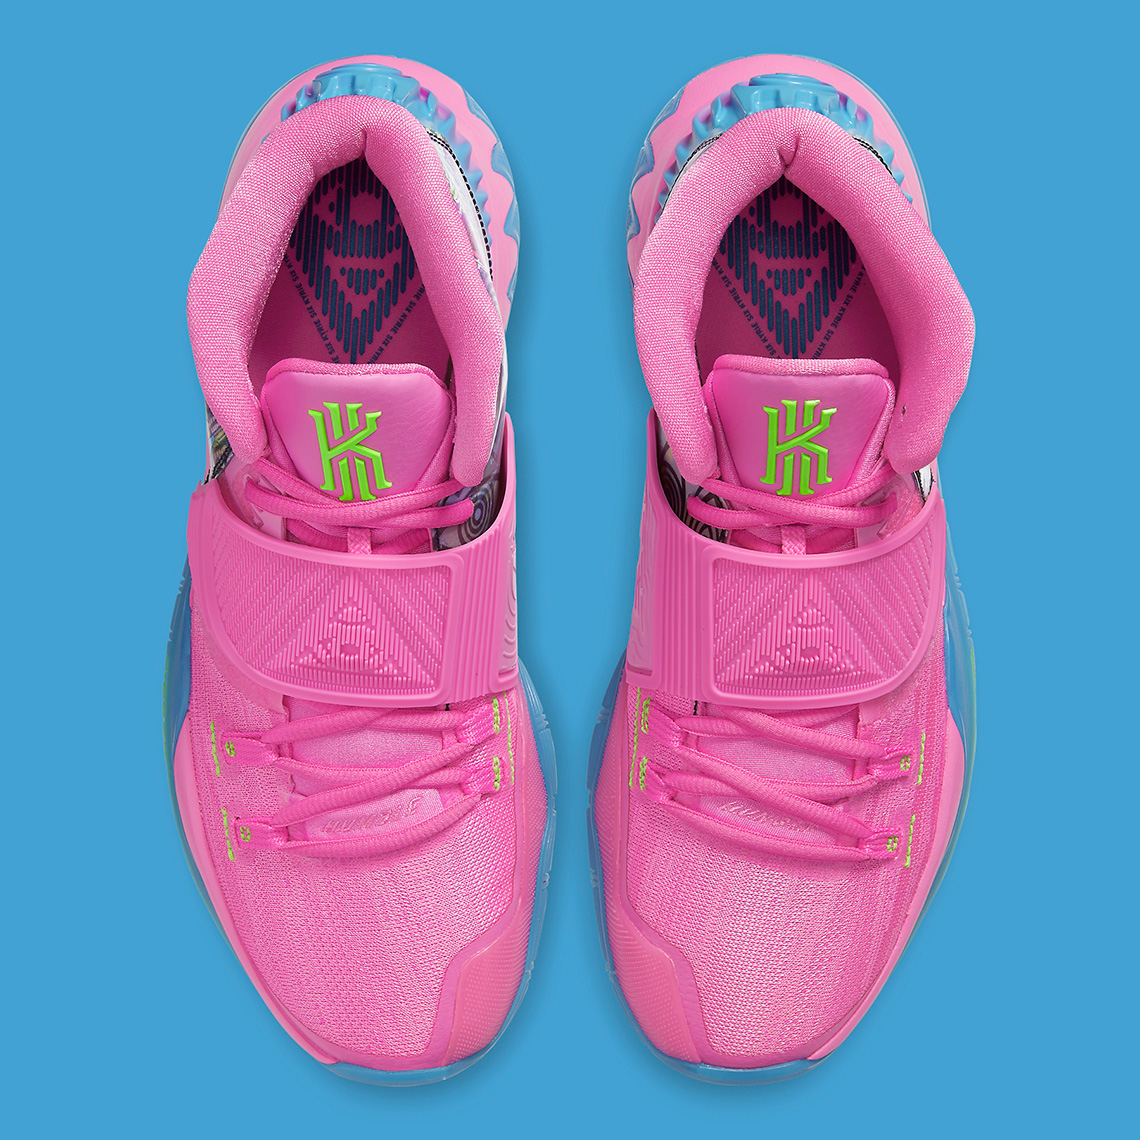 kyrie 6 pink shoes